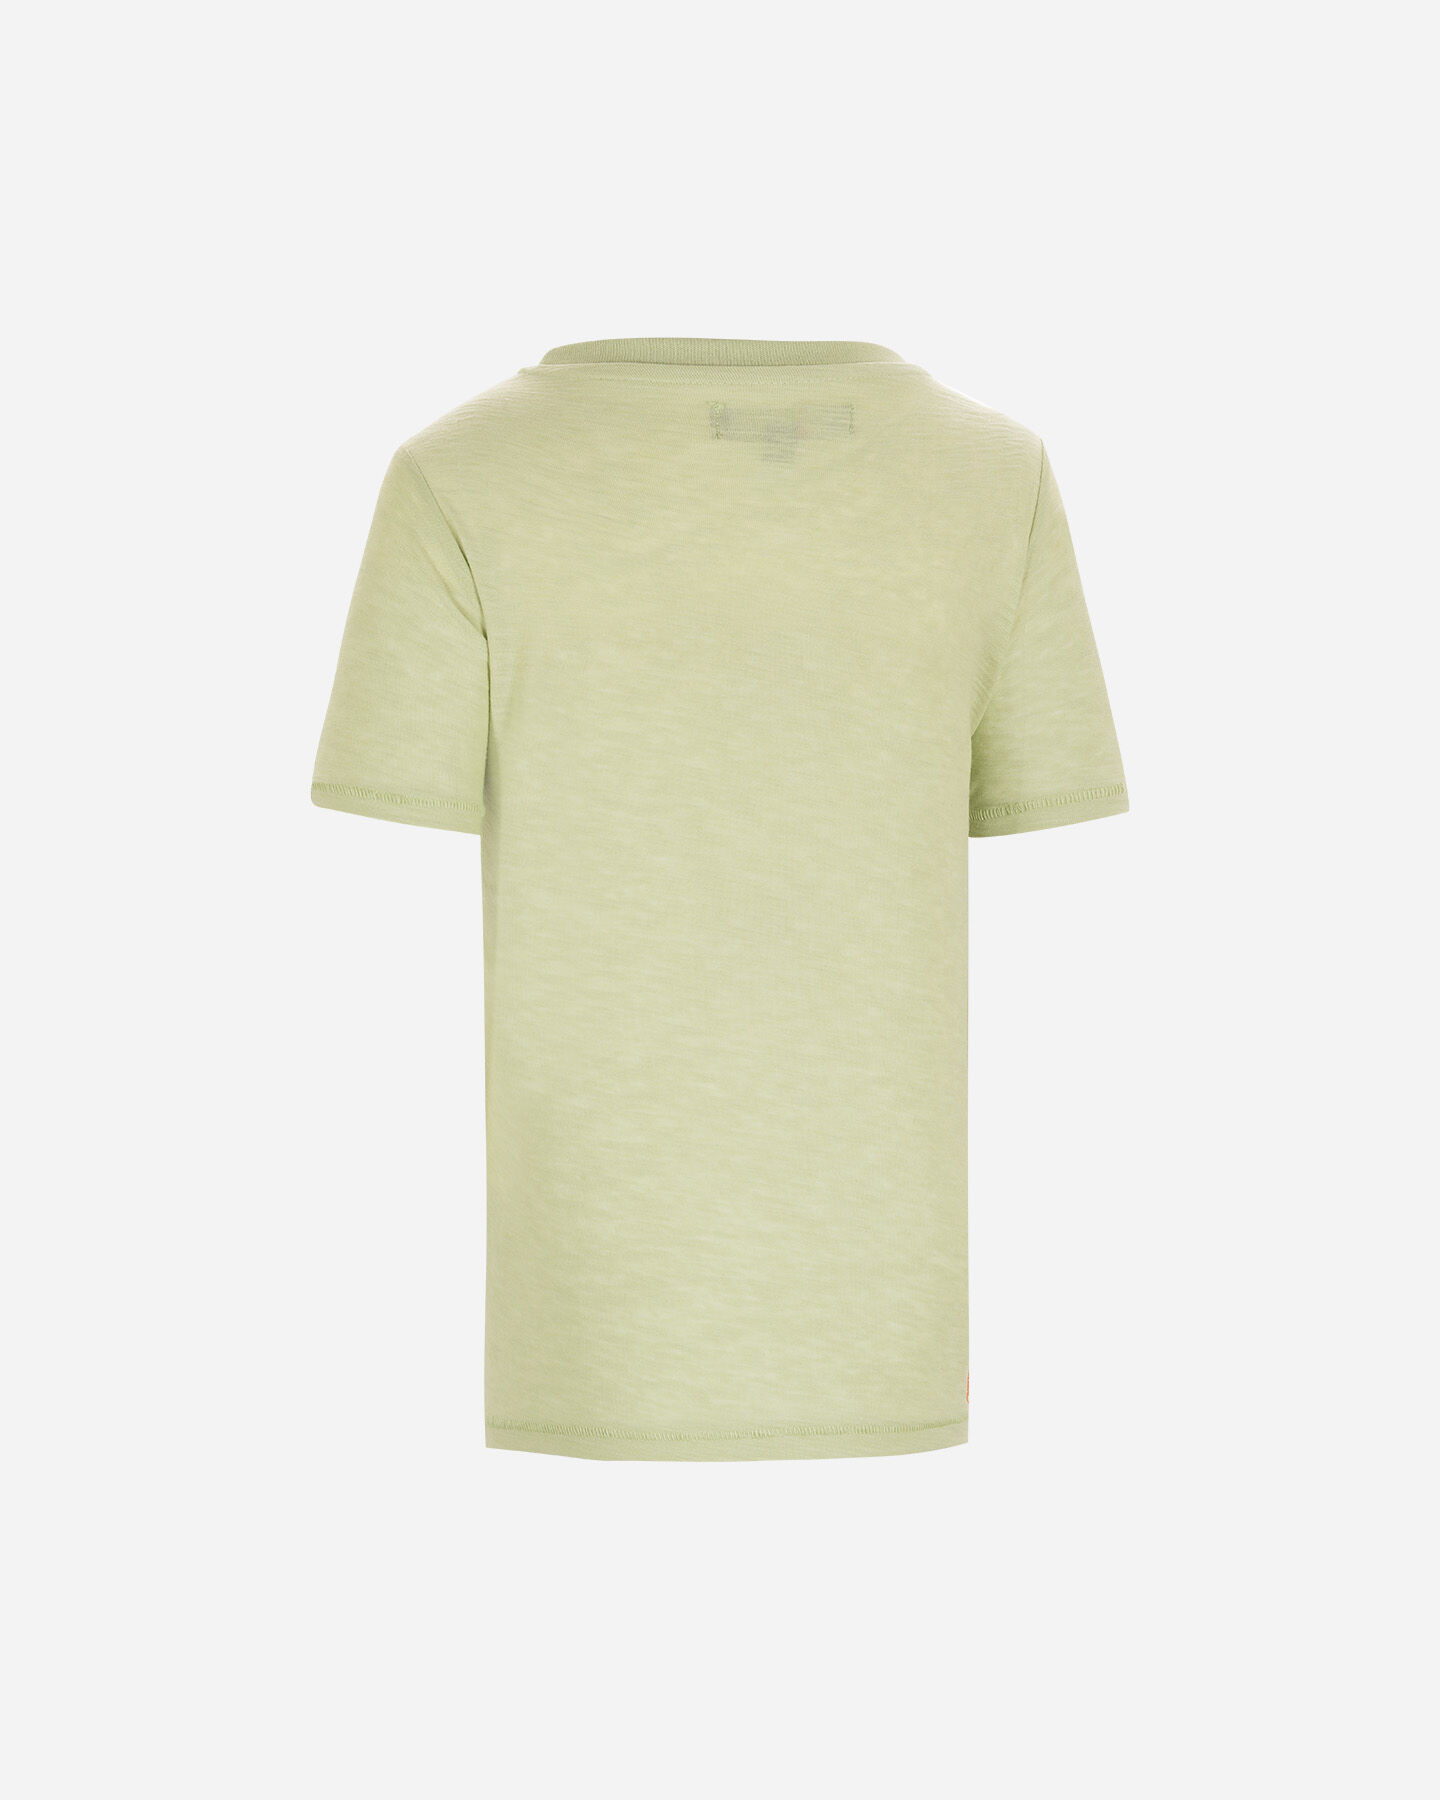  T-Shirt MISTRAL CLASSIC JR S4100881|1126|6A scatto 1